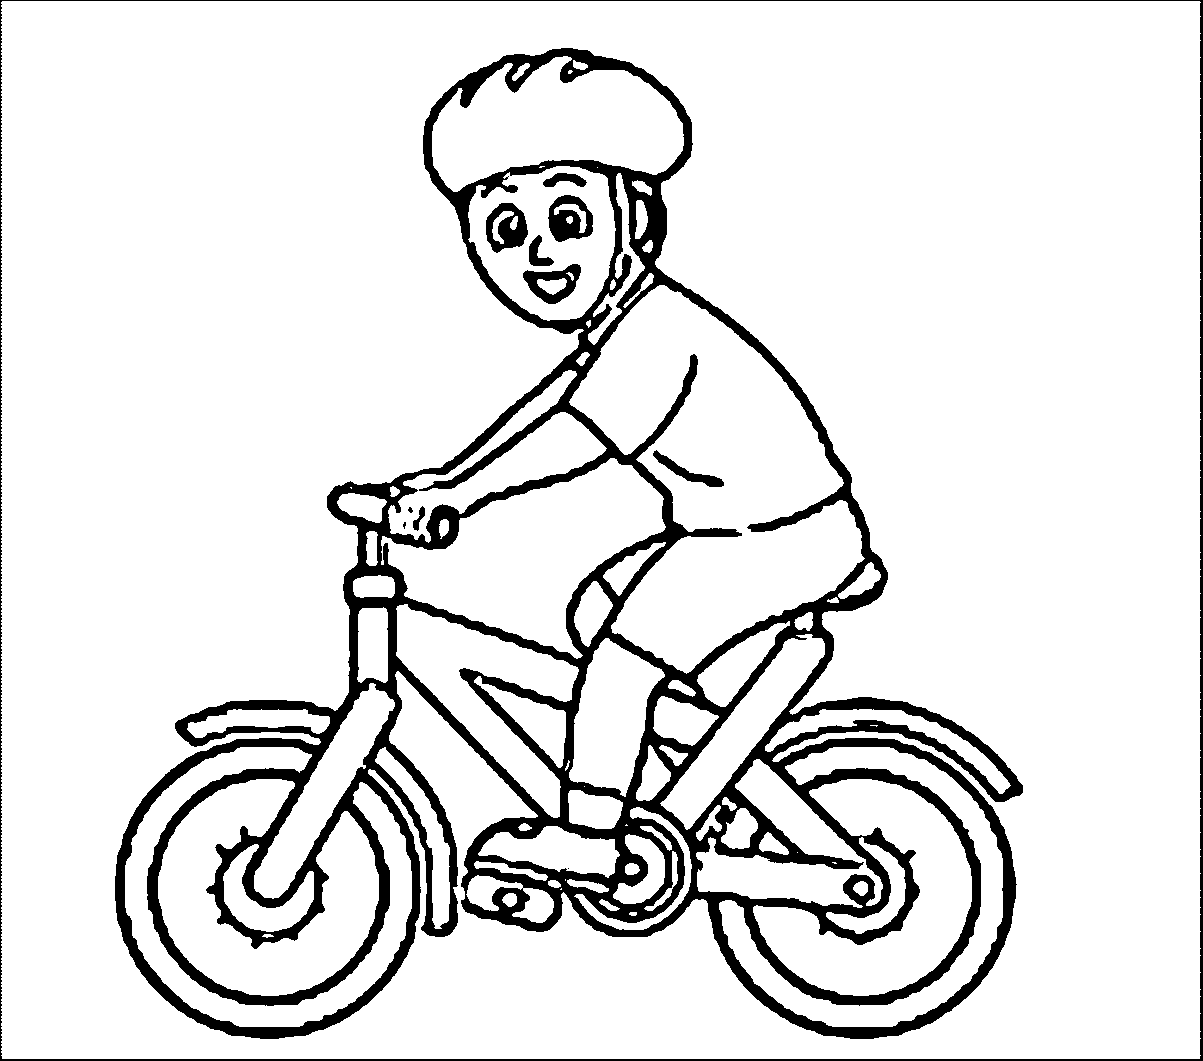 Bicycle Rider Wearing Helmet Riding Bicycle Coloring Page